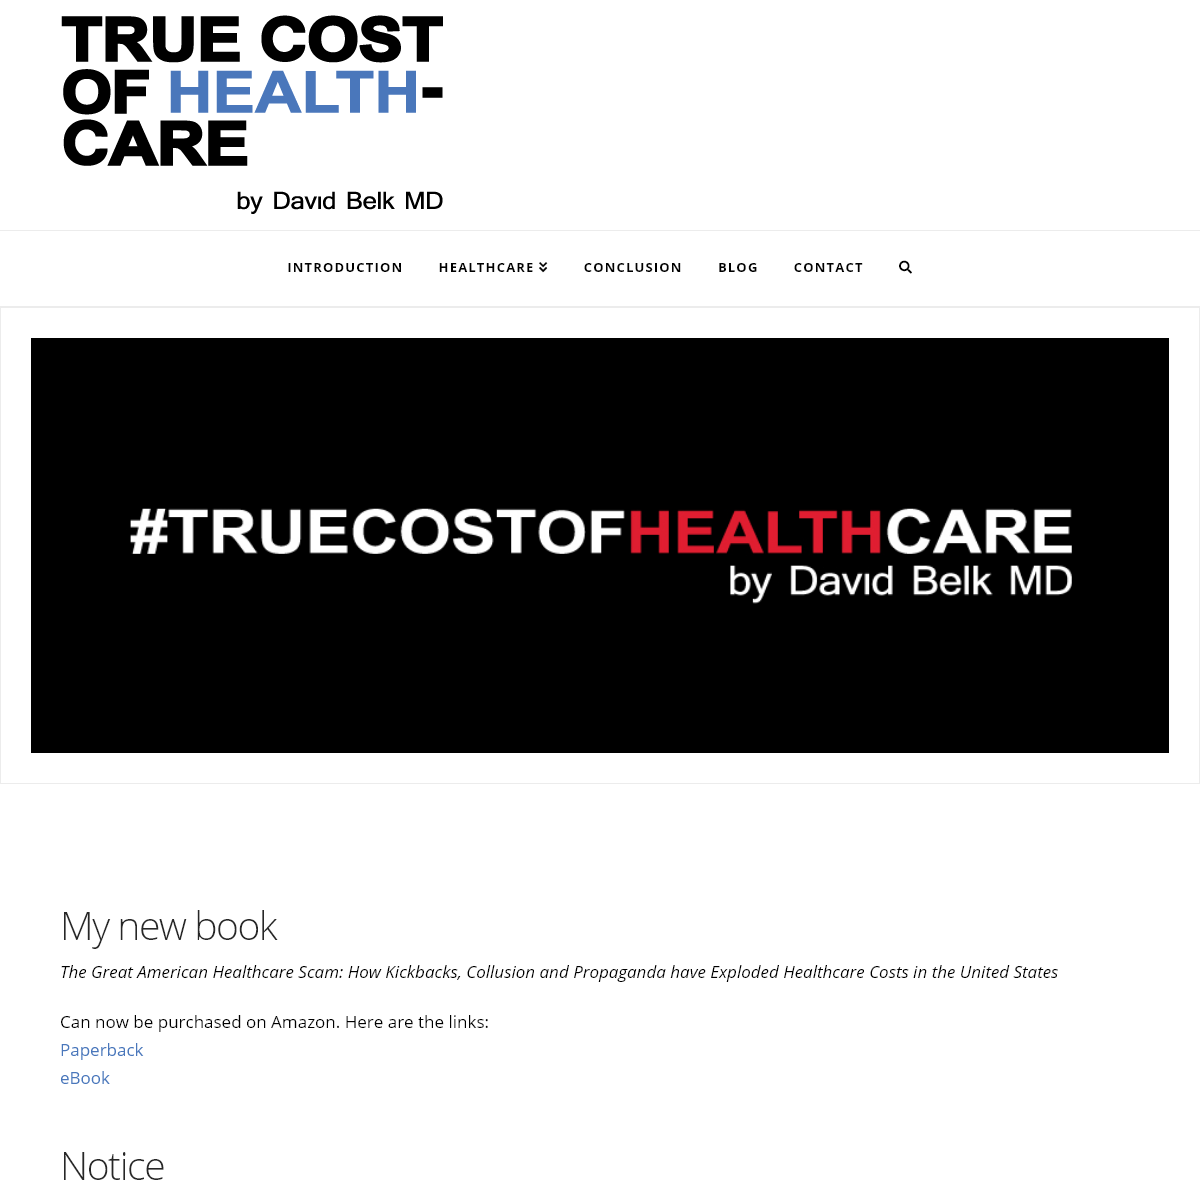 A complete backup of truecostofhealthcare.org